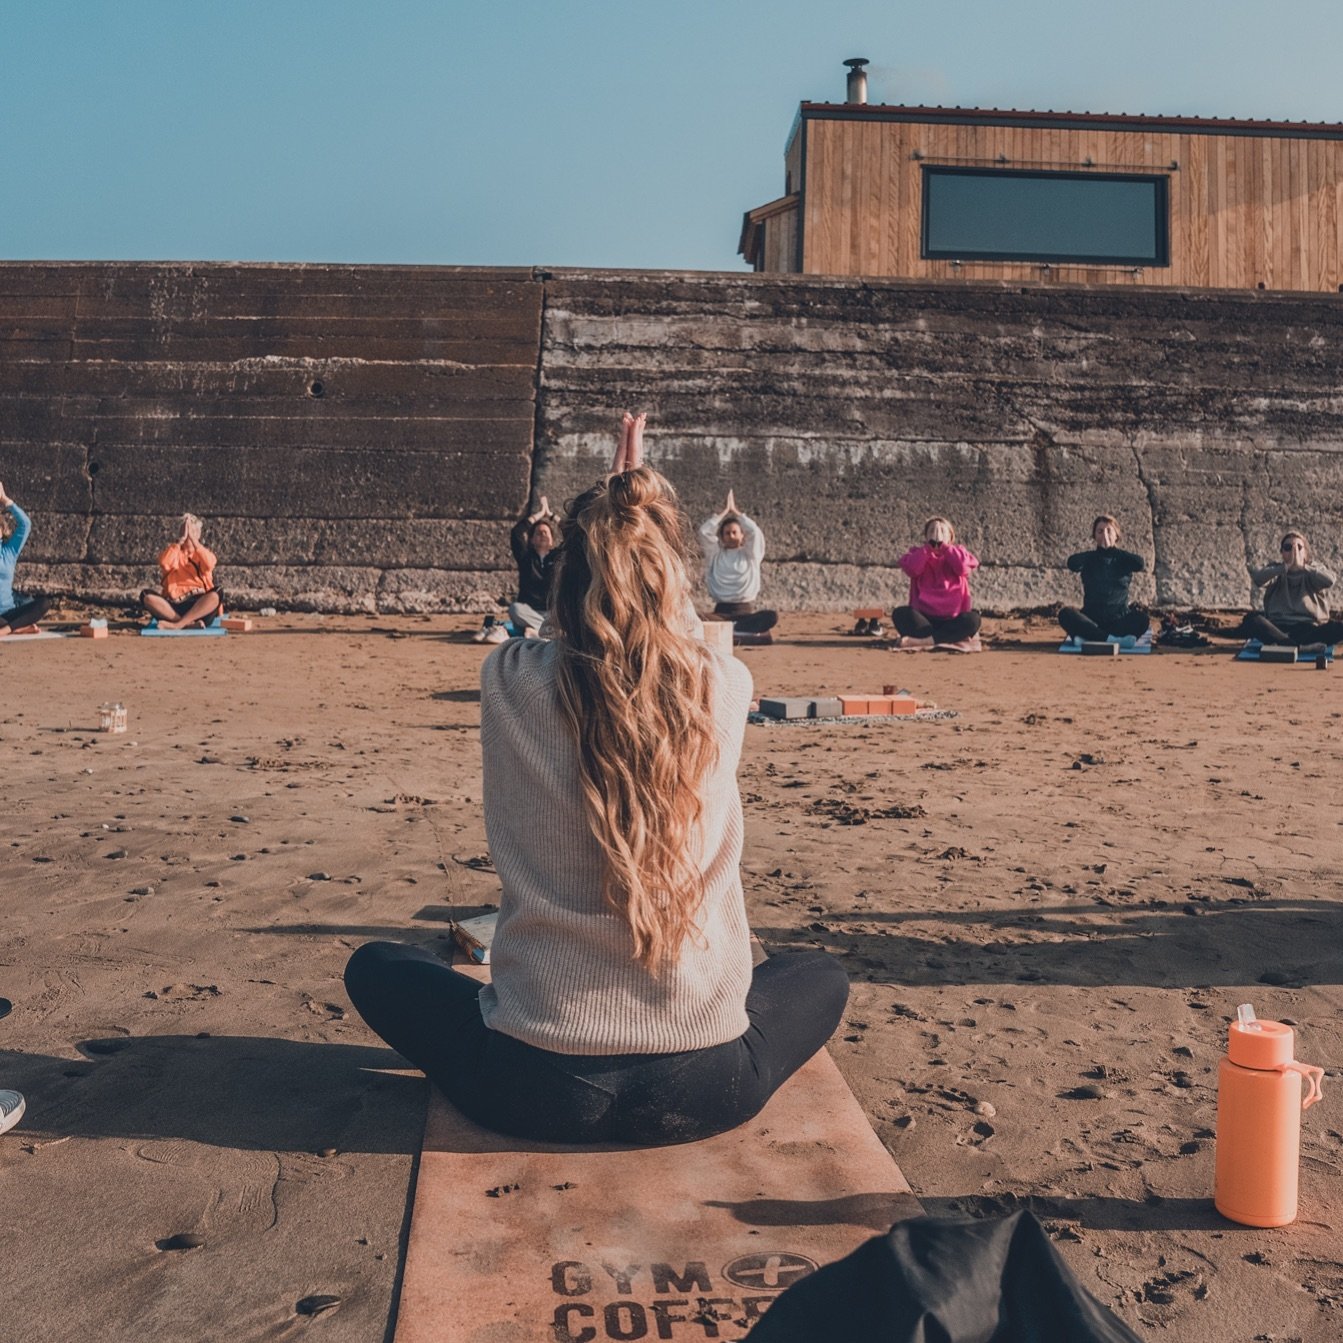 My goal 3 years ago, when I started the Sunrise Special was to create a little space for reconnection, movement, community + good vibes at the beach.

I am so proud to enter our 4th Summer and to see the little community that we have built. How peopl